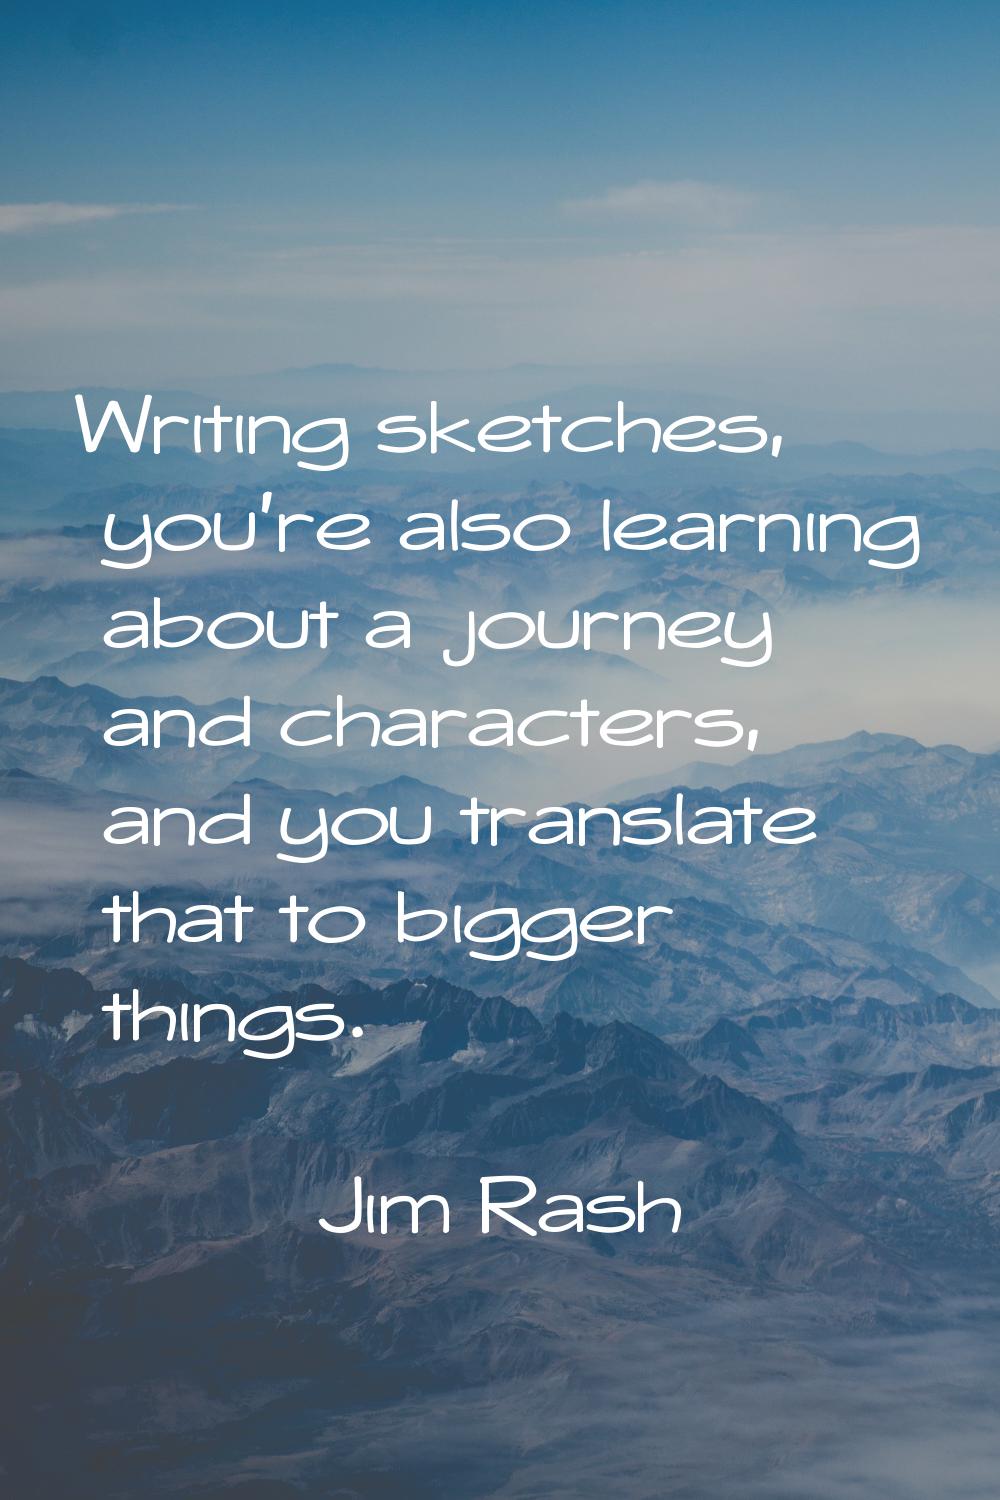 Writing sketches, you're also learning about a journey and characters, and you translate that to bi